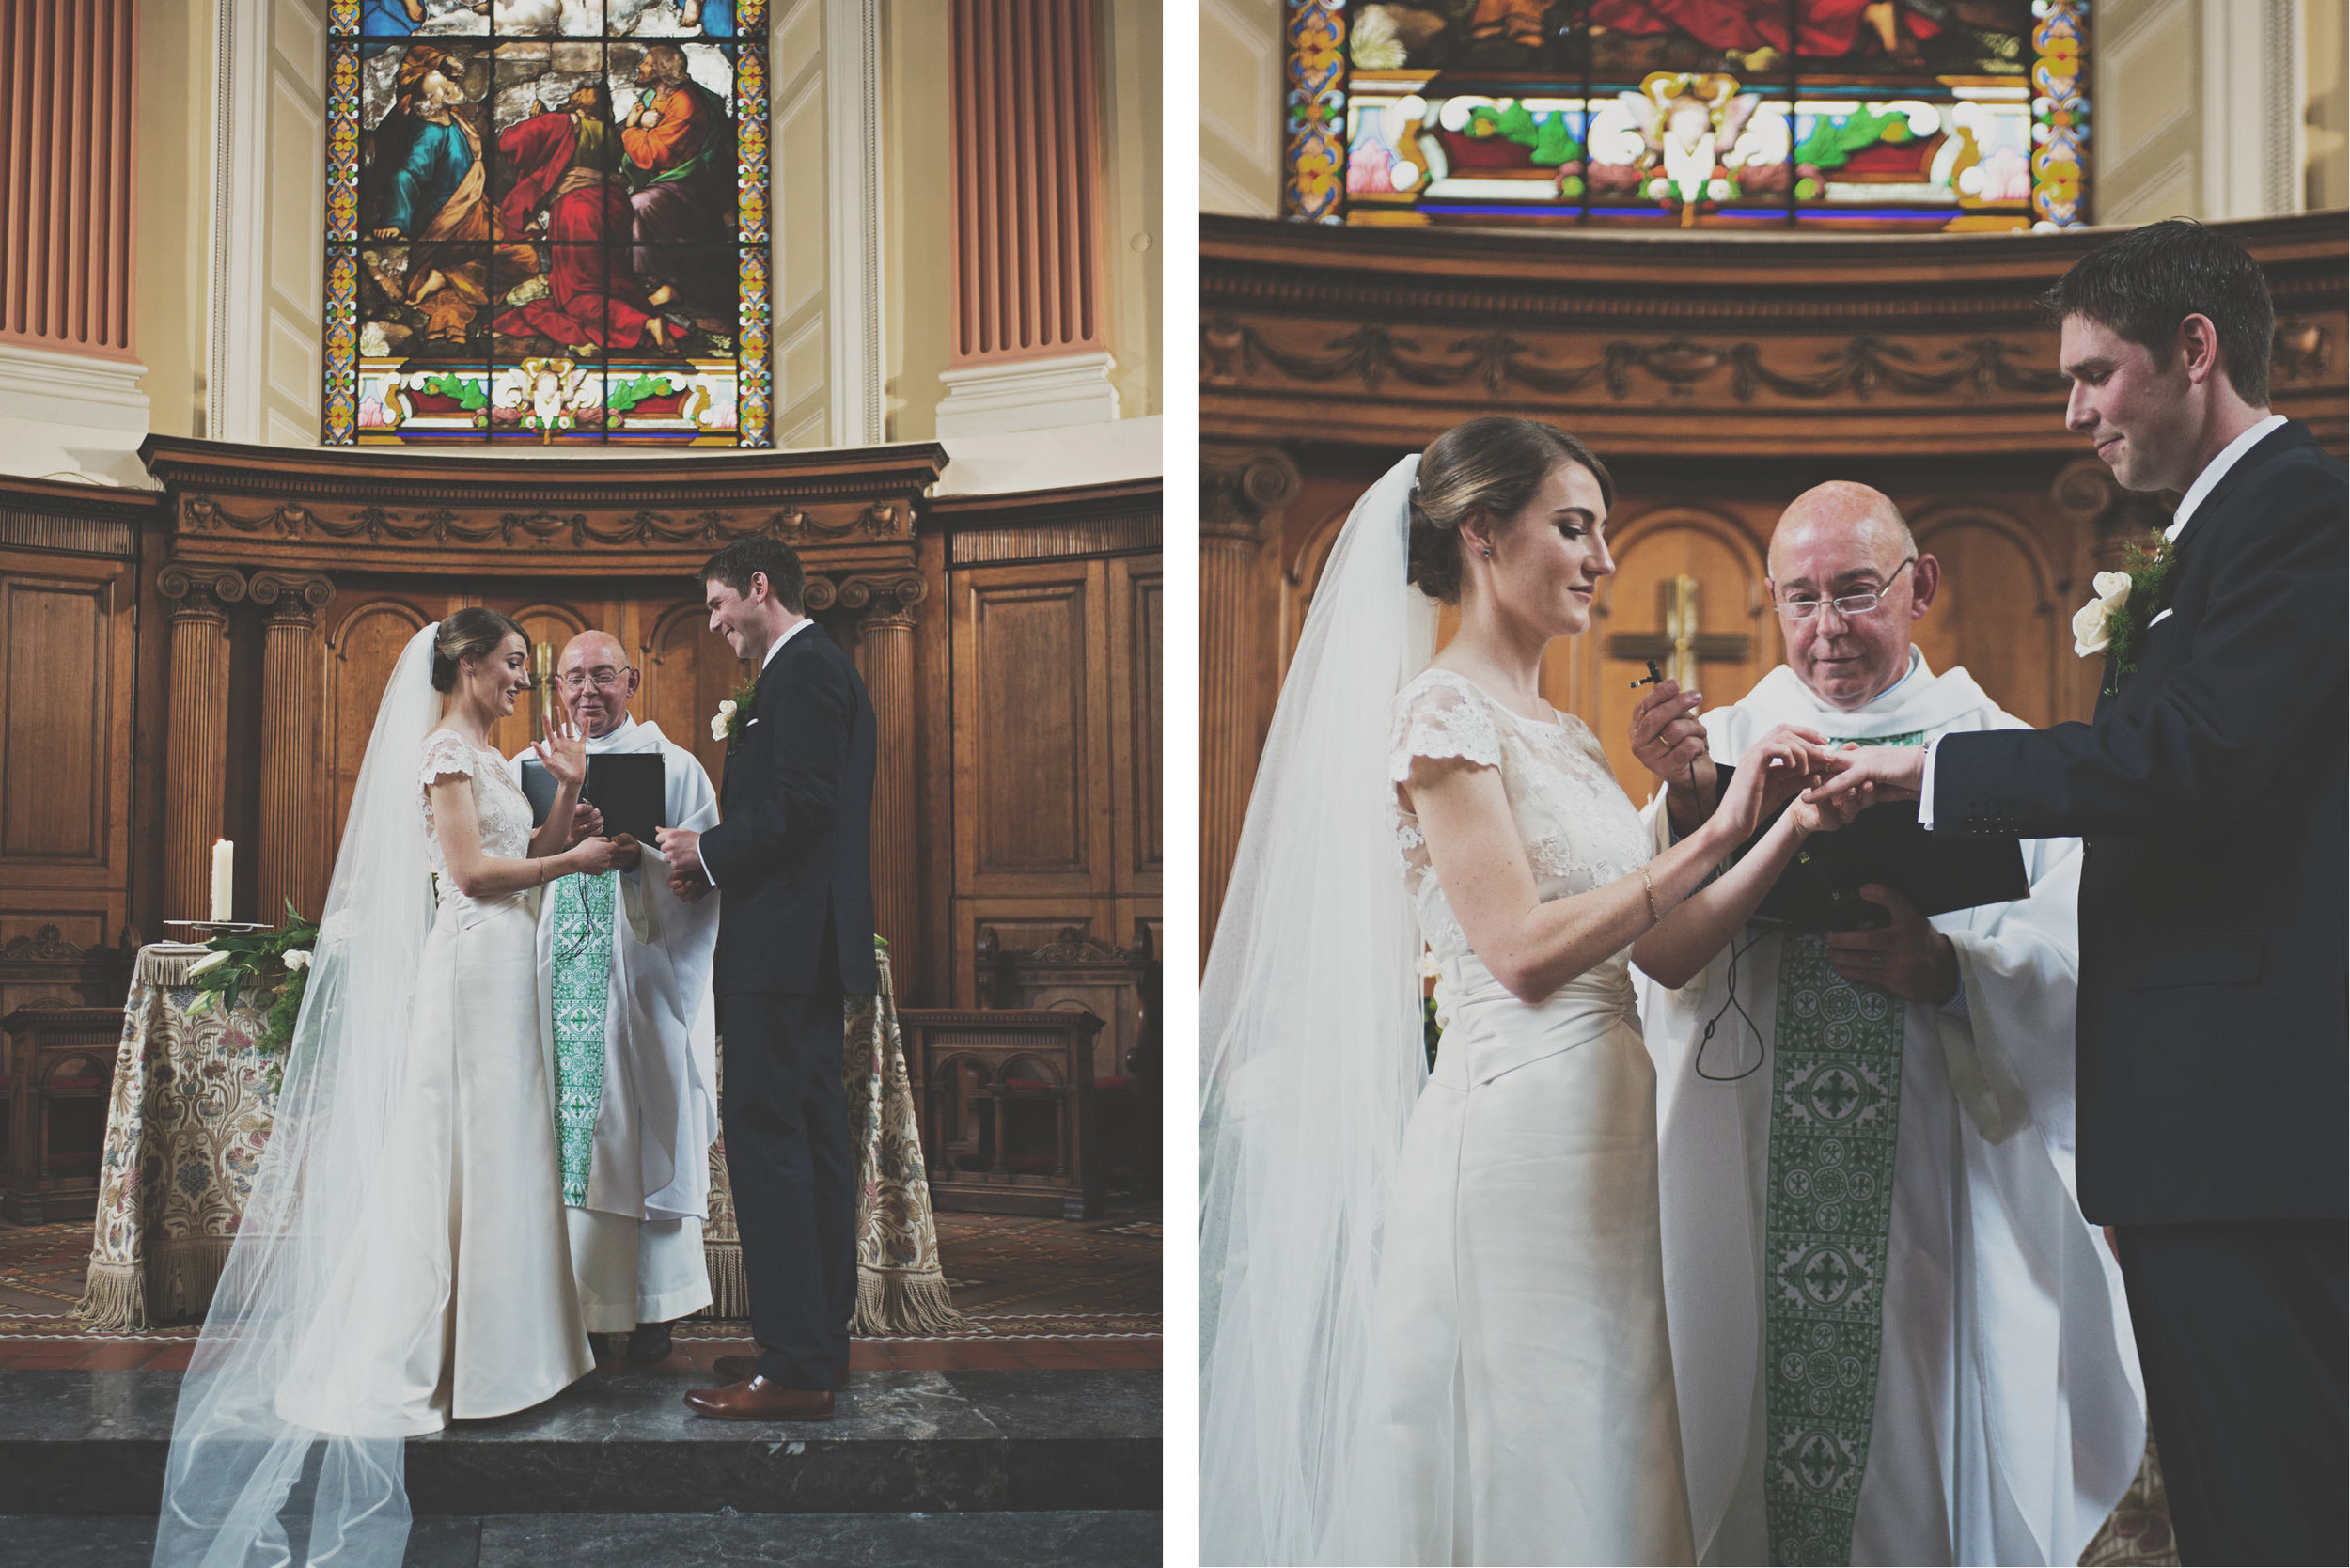 Getting married at Trinity Chapel Dublin